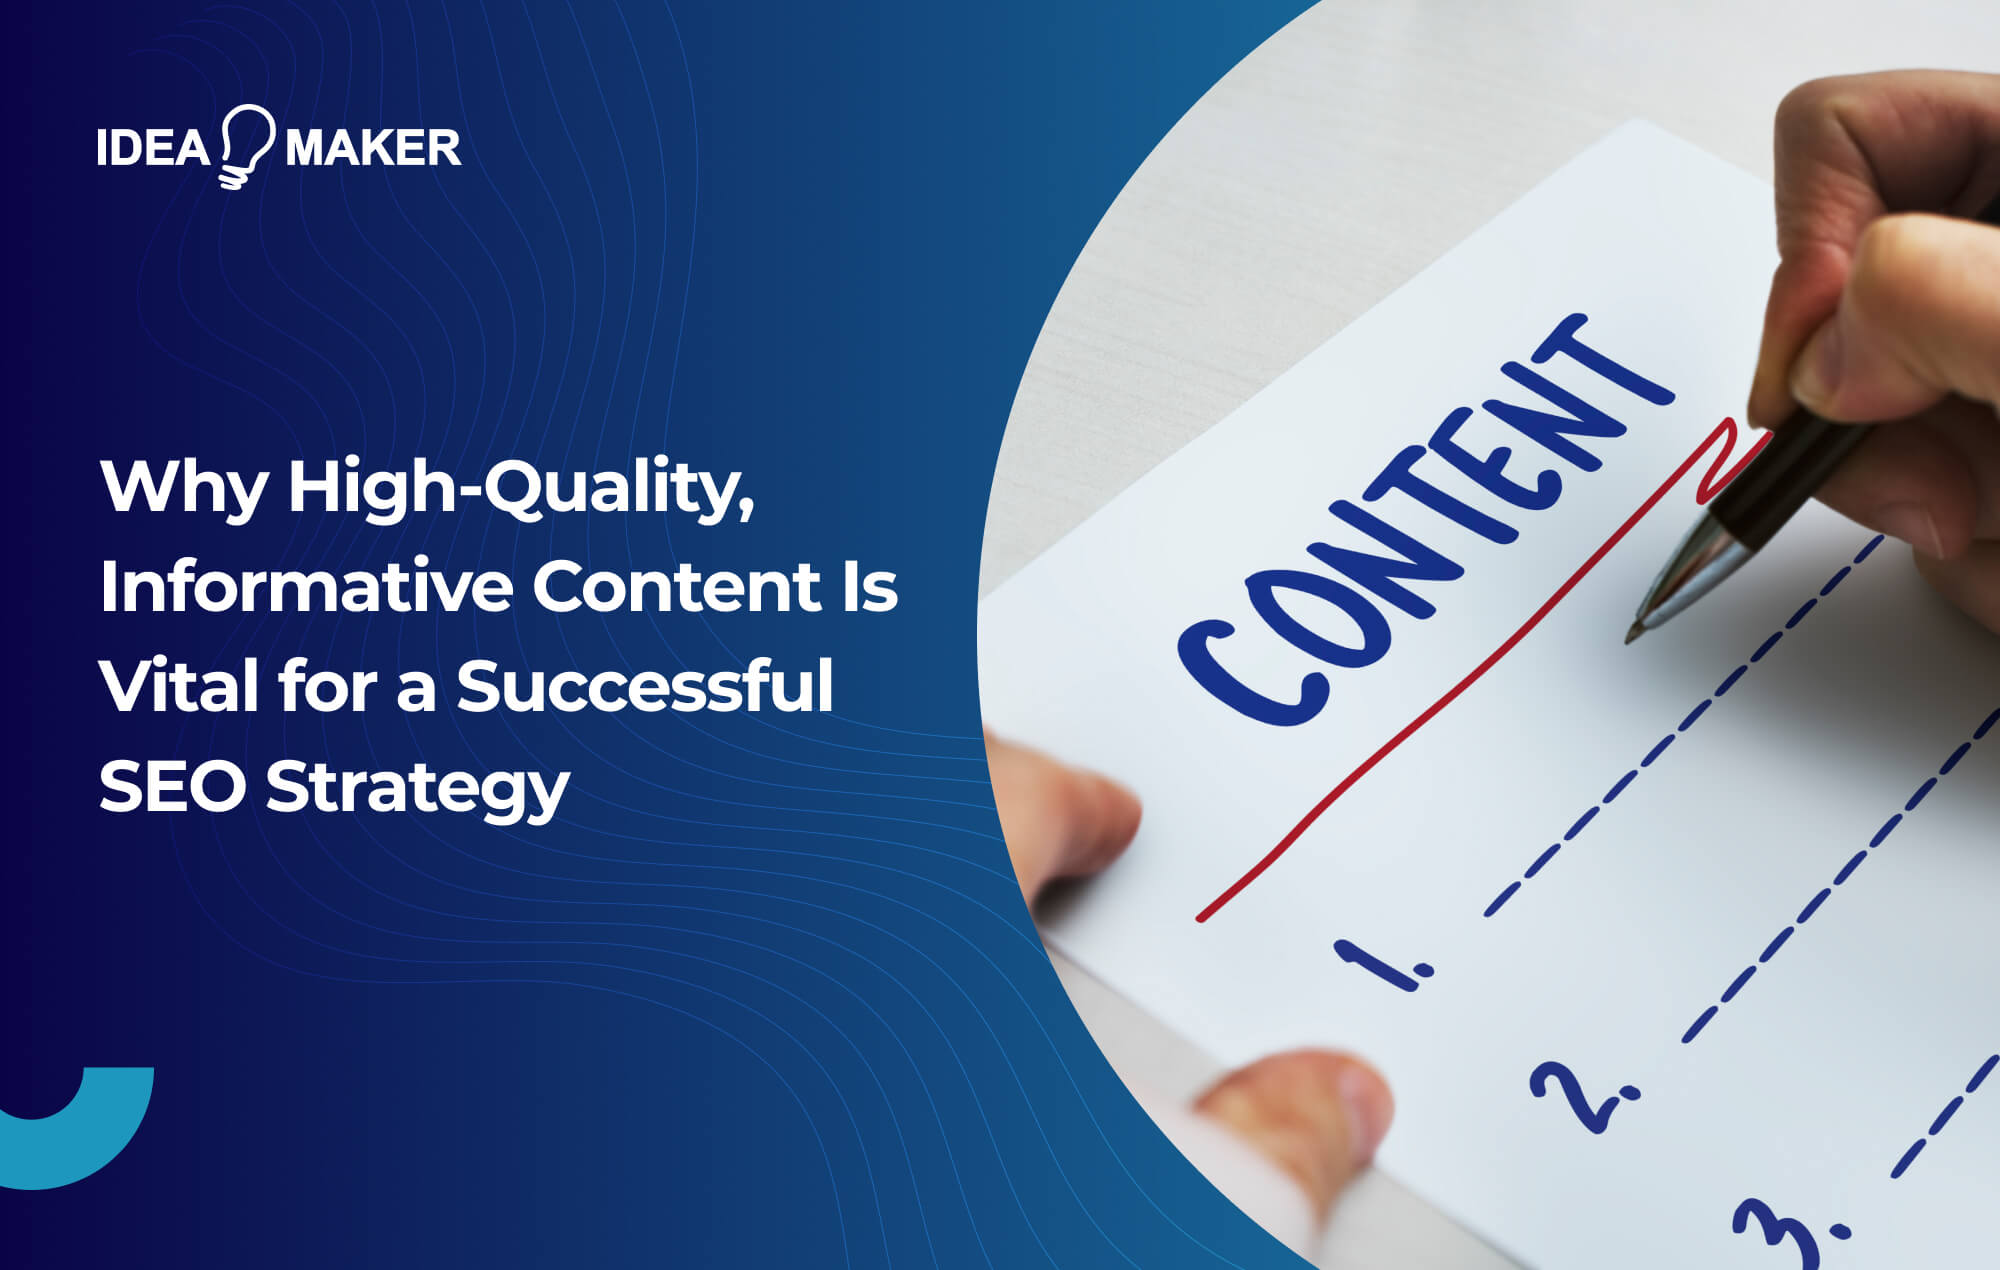 Why High-Quality, Informative Content is Vital for a Successful SEO Strategy?